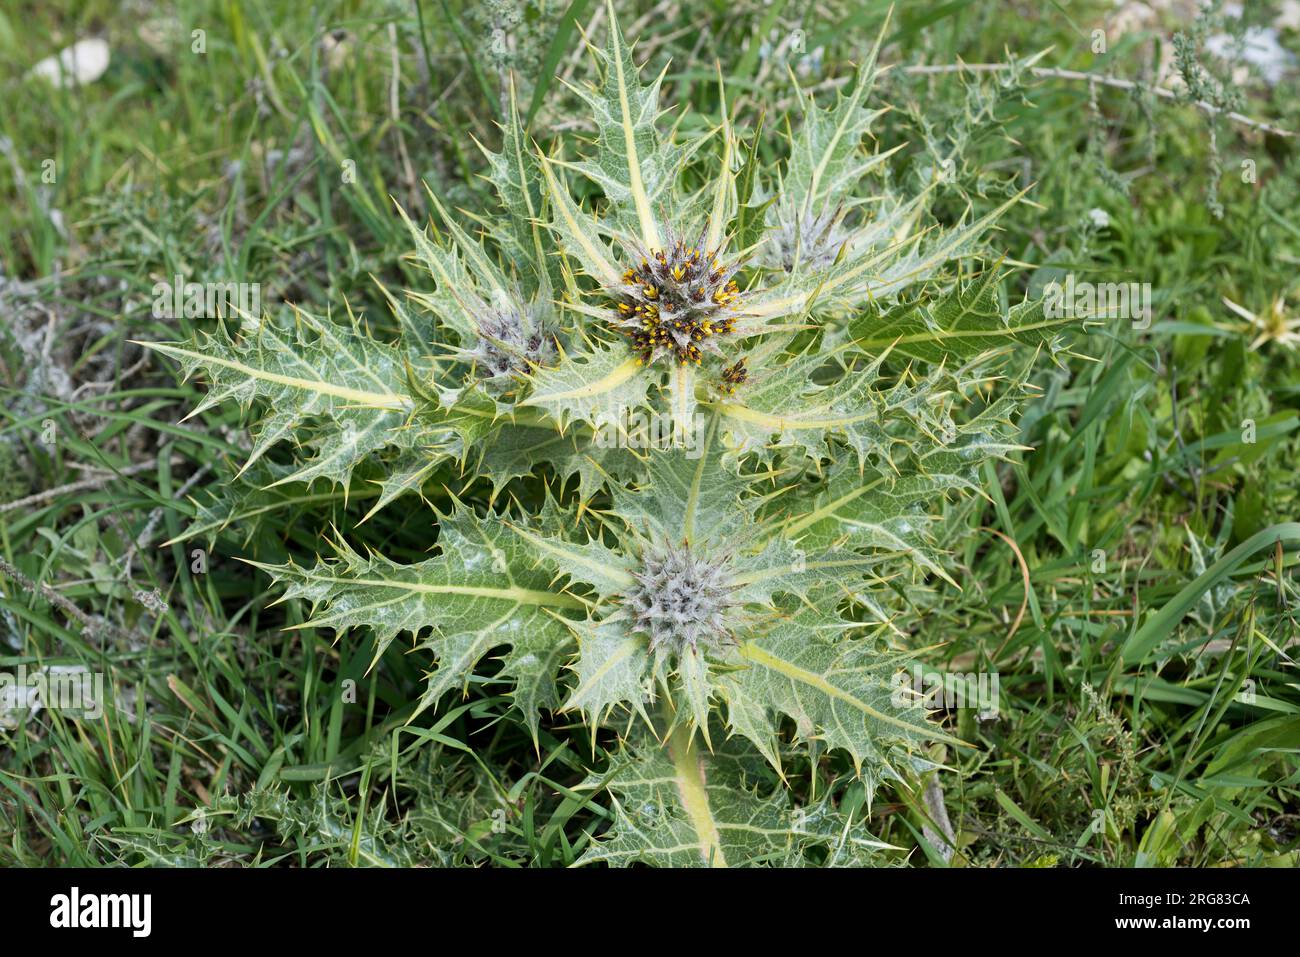 Akub (Gundelia tournefortii) is an edible perennial herb whith spiny leaves. Its pollen were found on the Shroud of Turin. Eudicot. Asteraceae. This p Stock Photo